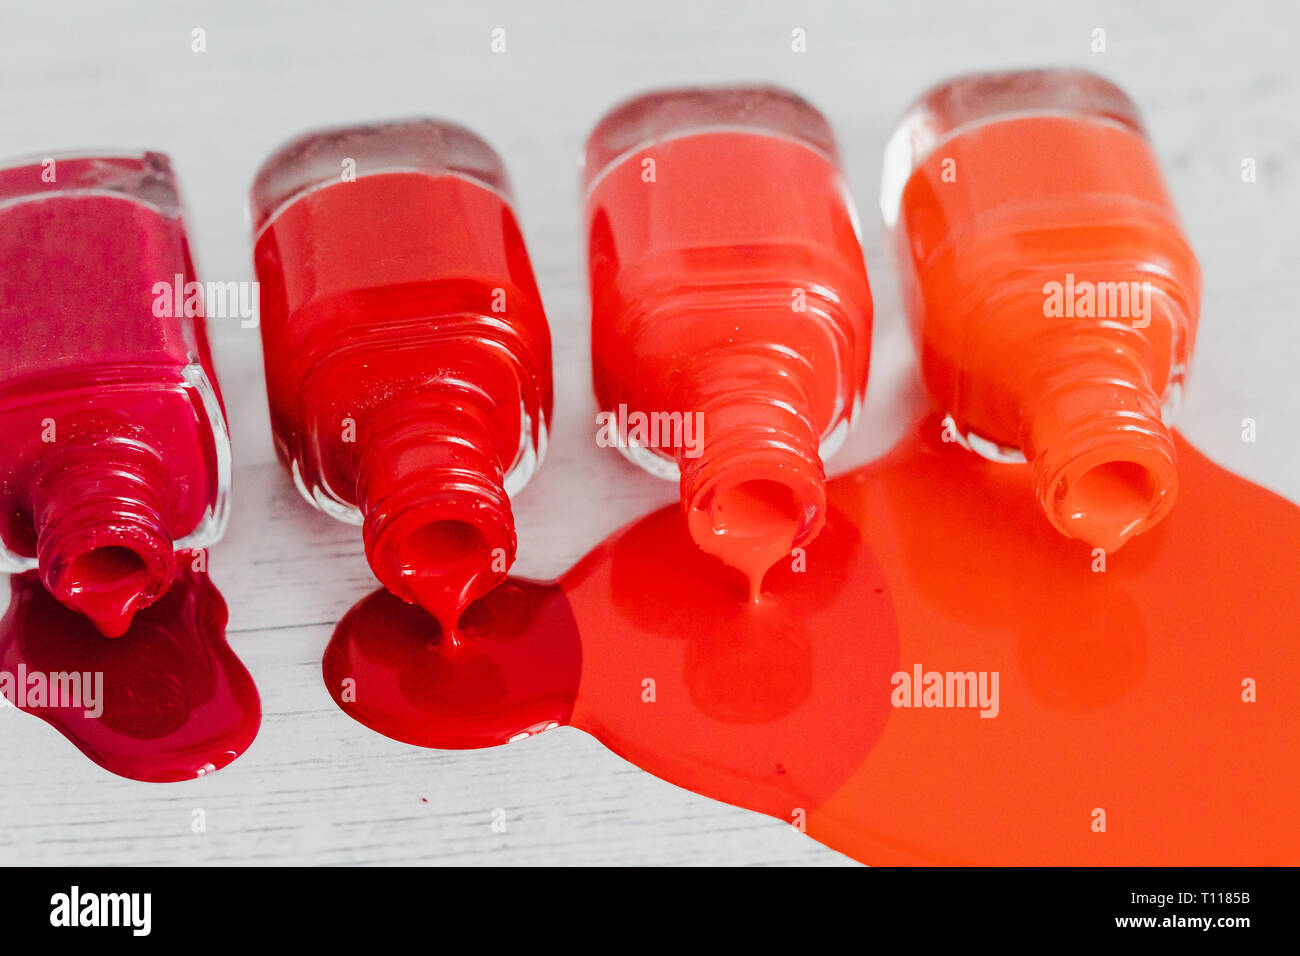 nail polish bottles in different shades of red to orange and purple spilling color on wooden surface, concept of cosmetics industry and manicure Stock Photo